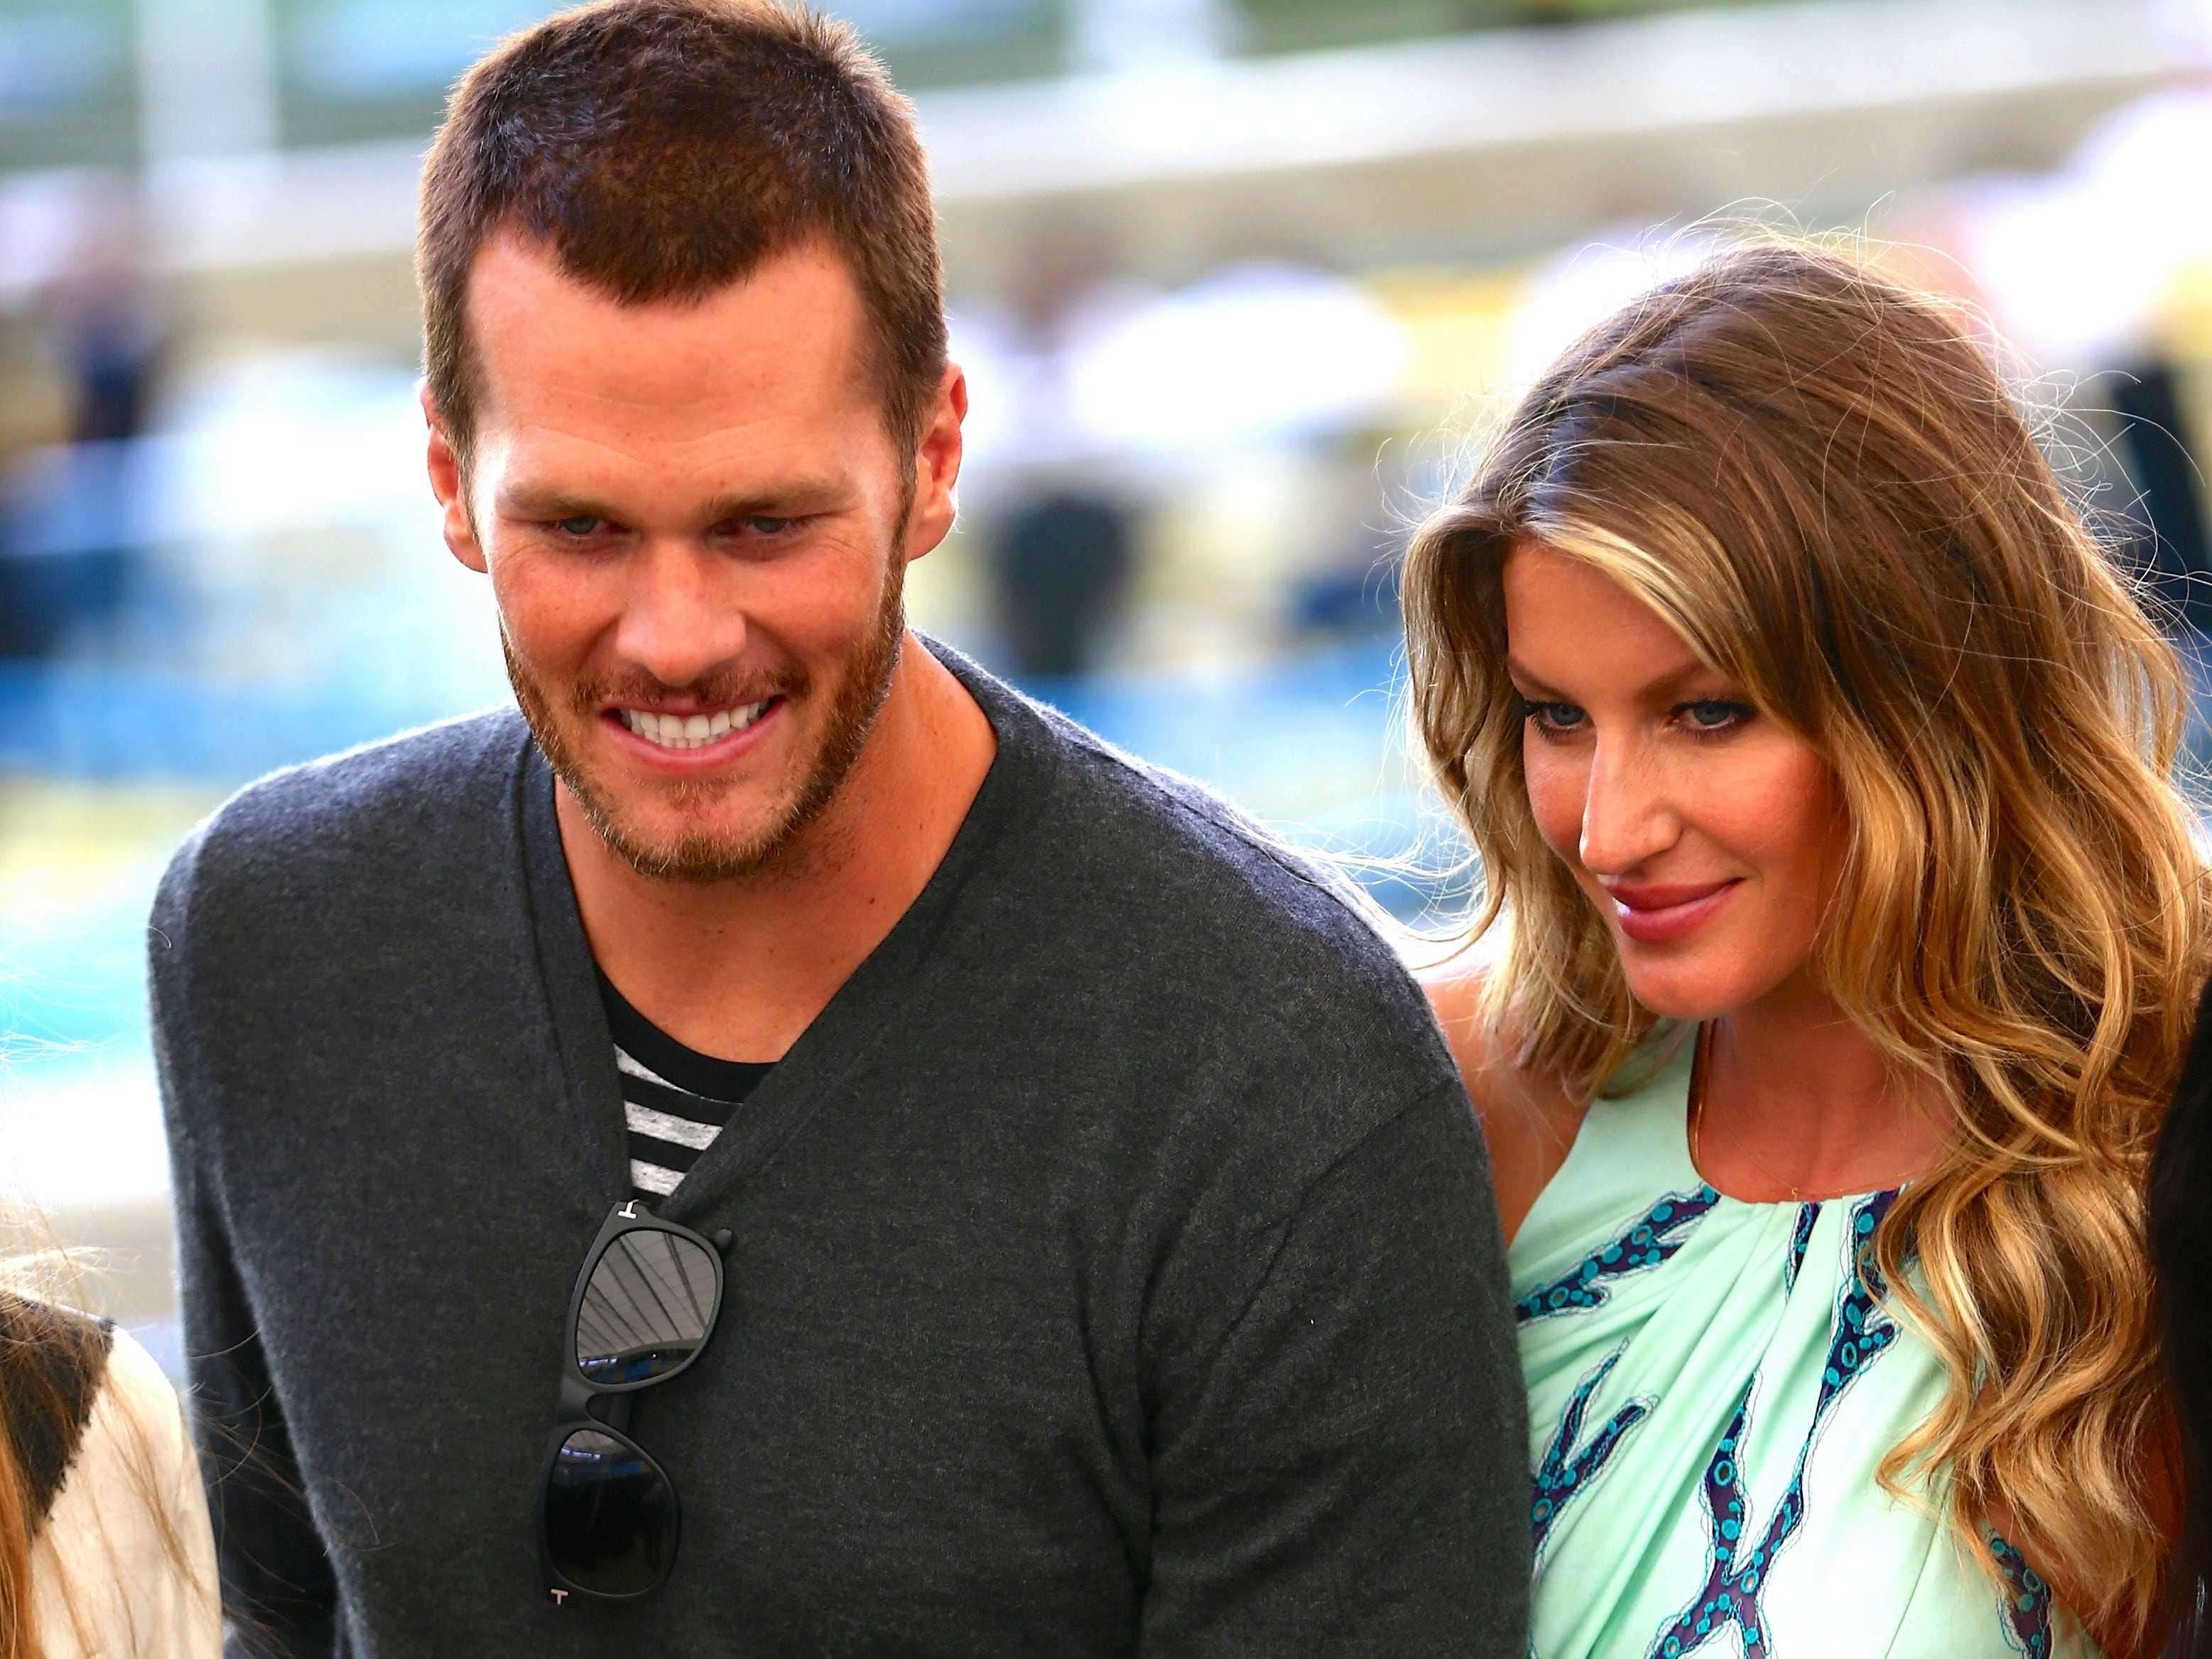 Tom Brady and Gisele Bündchen have been married for almost 12 years